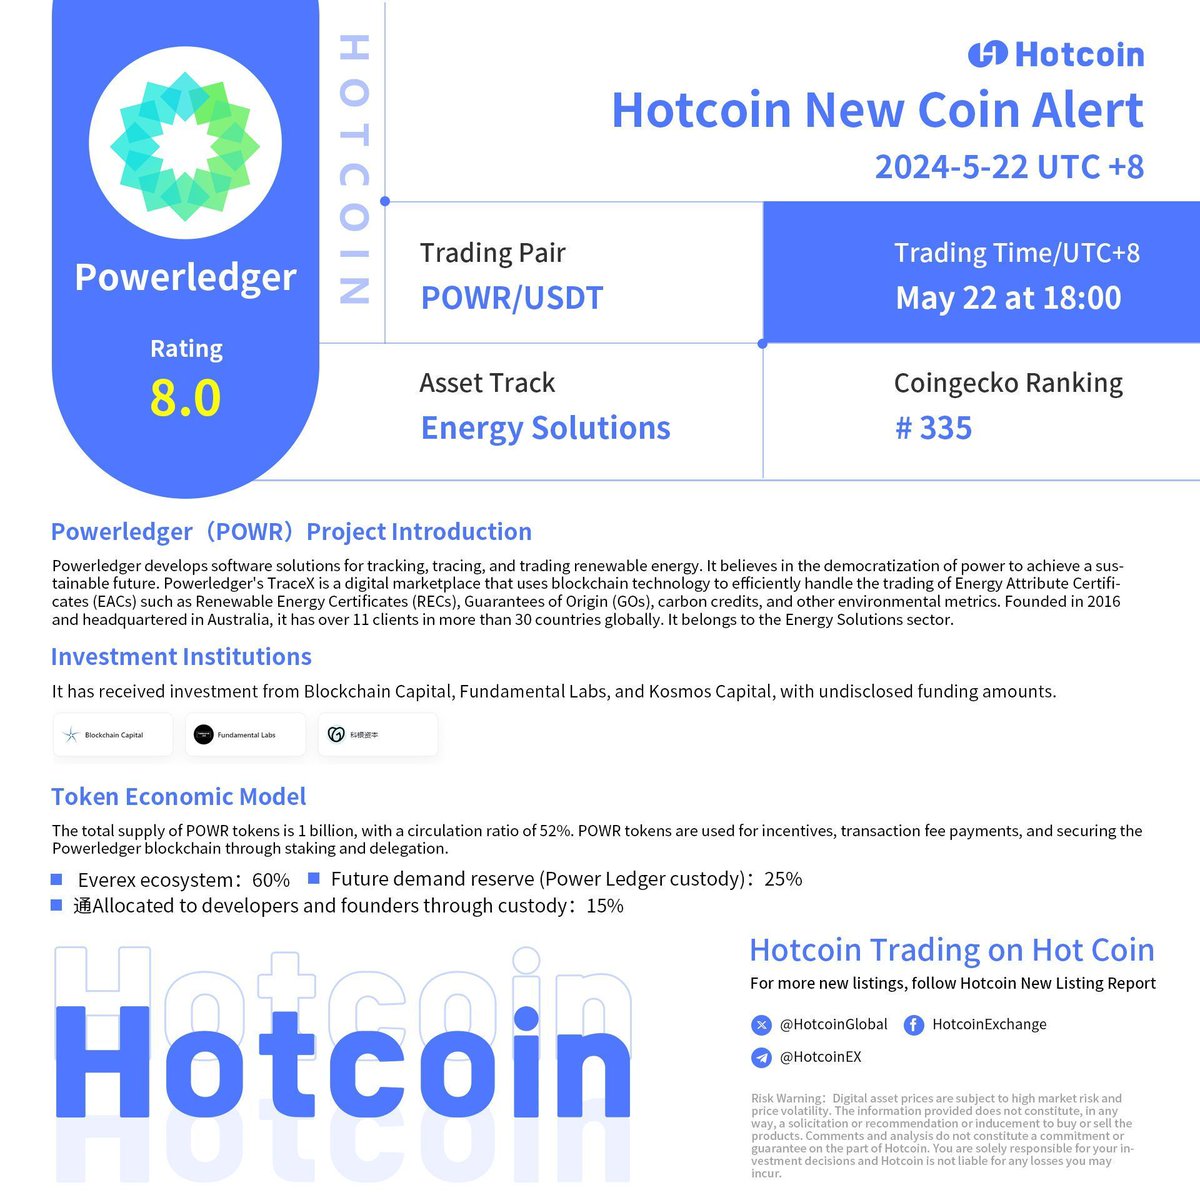 📢 Hotcoin Announcement! We just listed $POWR! 🚀

🌱🌏  Powerledger builds software for decentralized energy markets, offering innovative solutions for sustainable energy trading. Thank you for your support and trust! 🌐⚡️ #POWR #Energy #Blockchain #Crypto